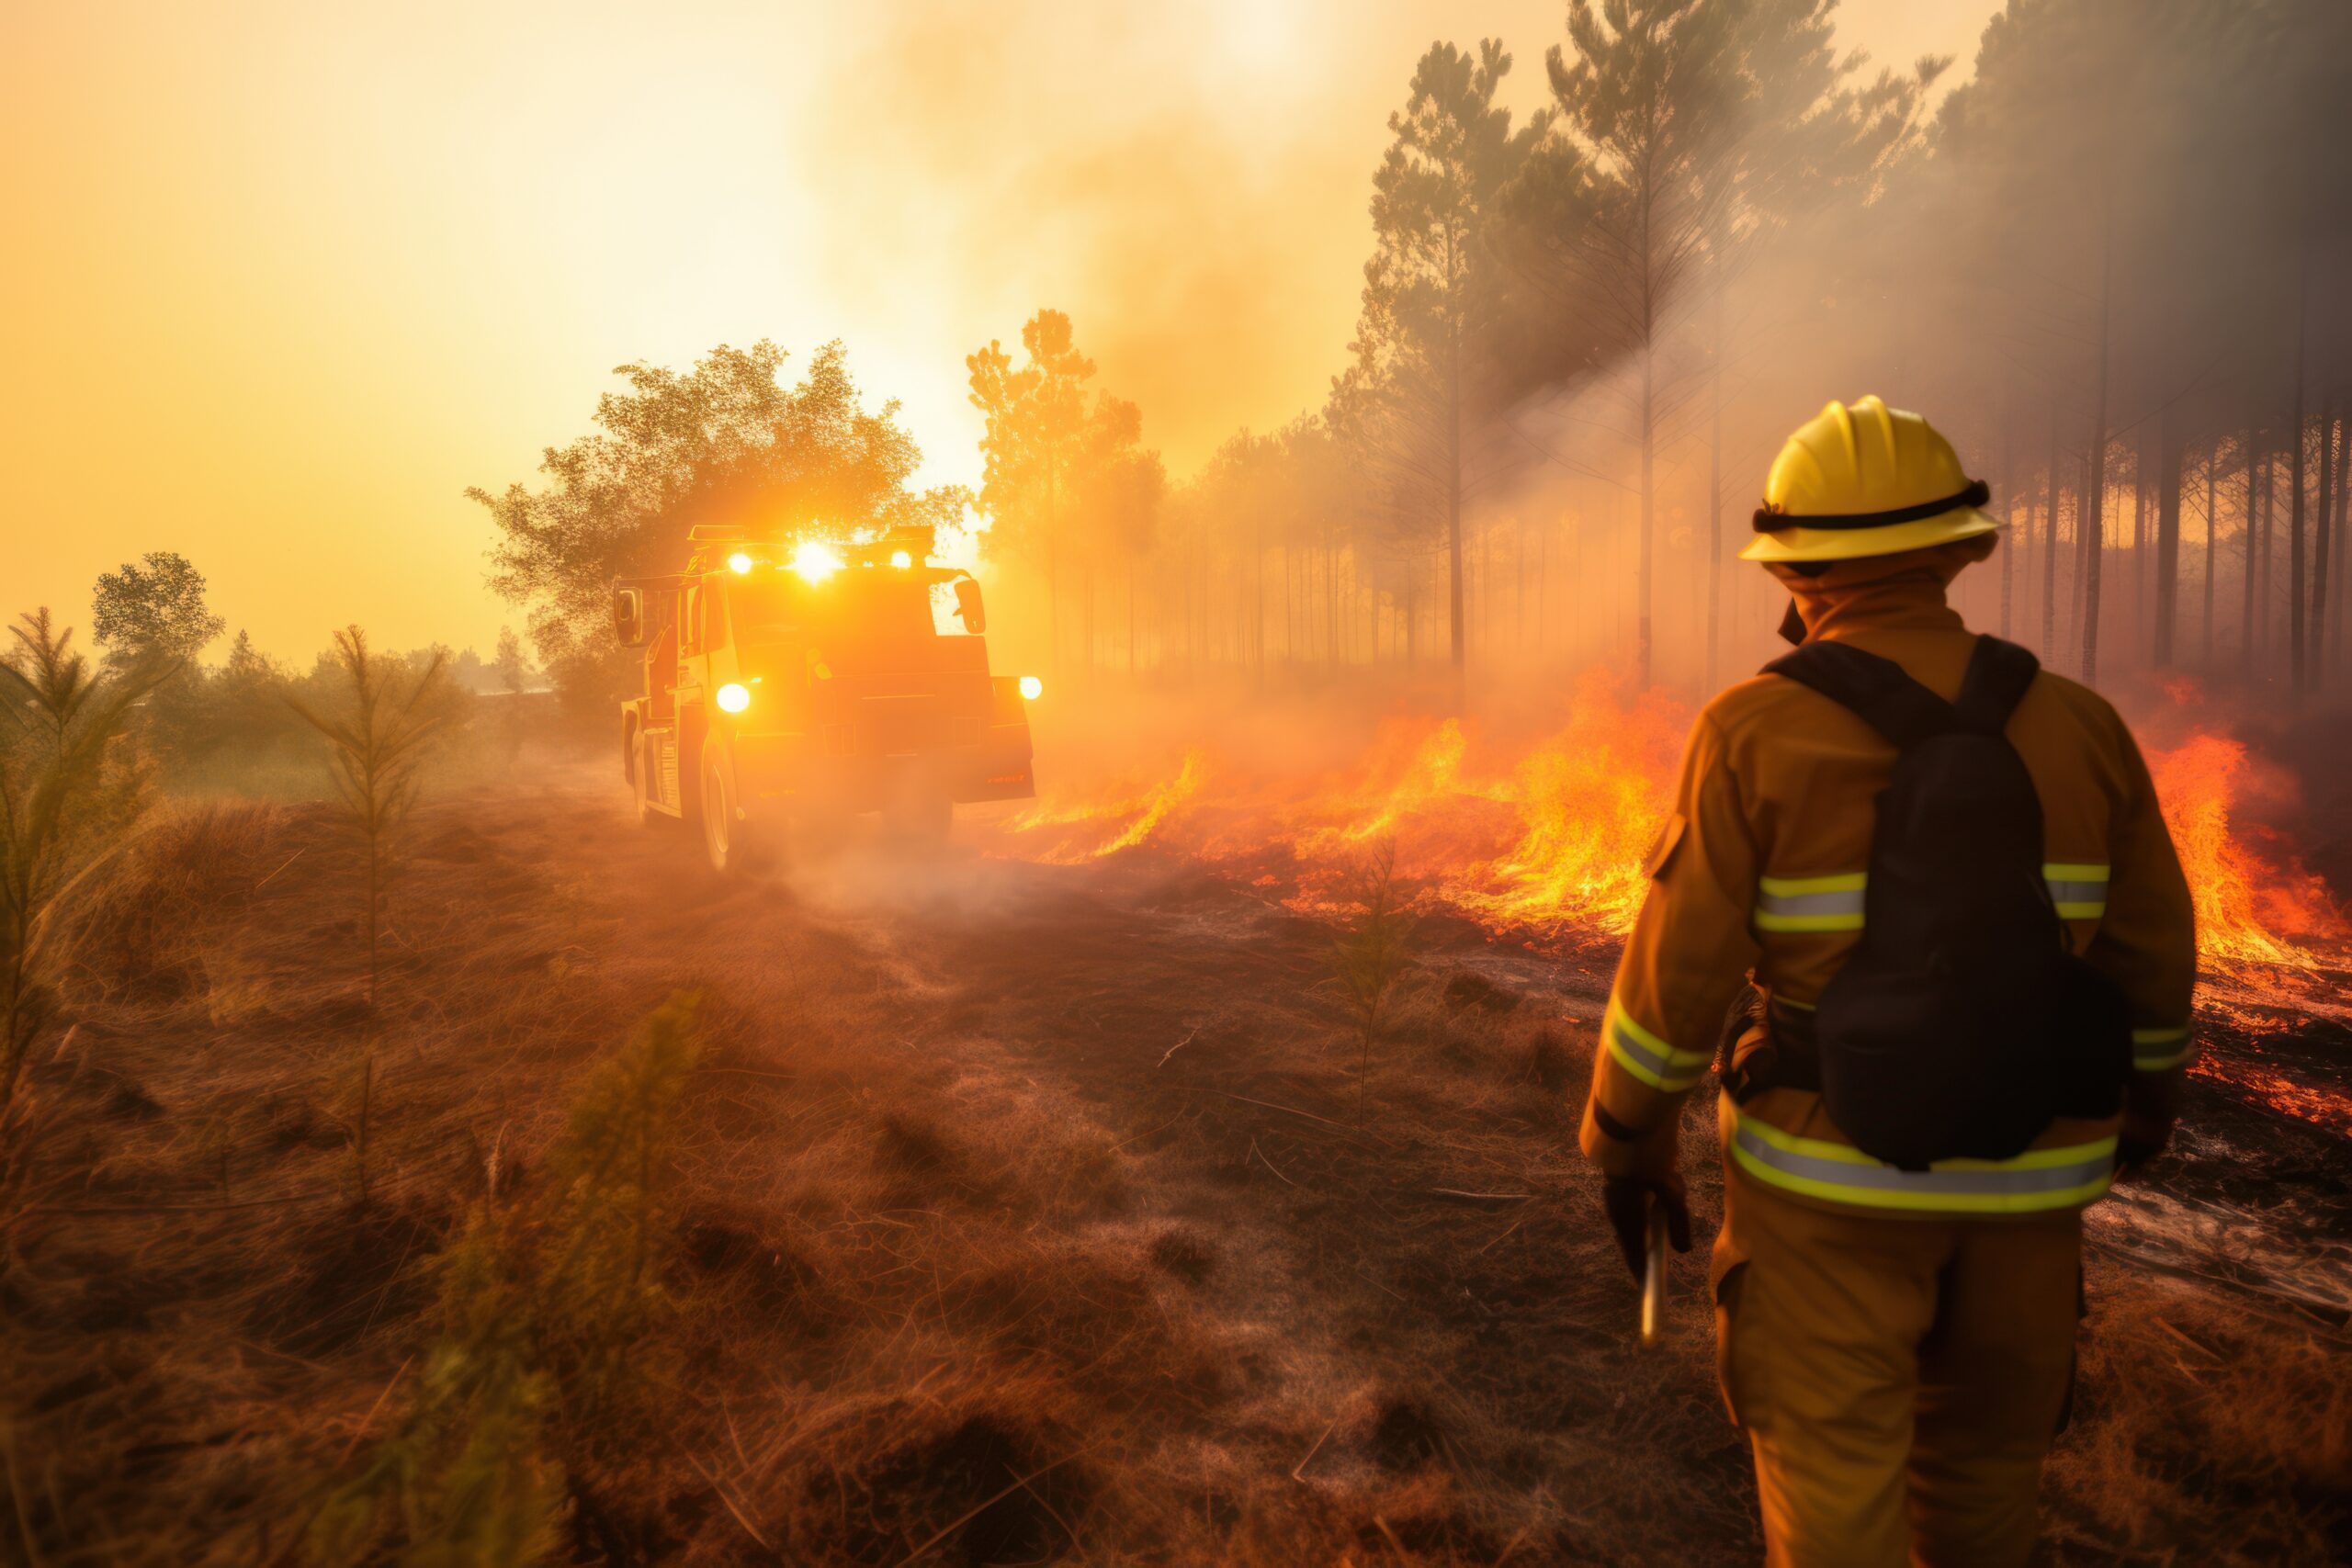 dramatic forest fire cause by hot weather. Firefighters battling wildfire